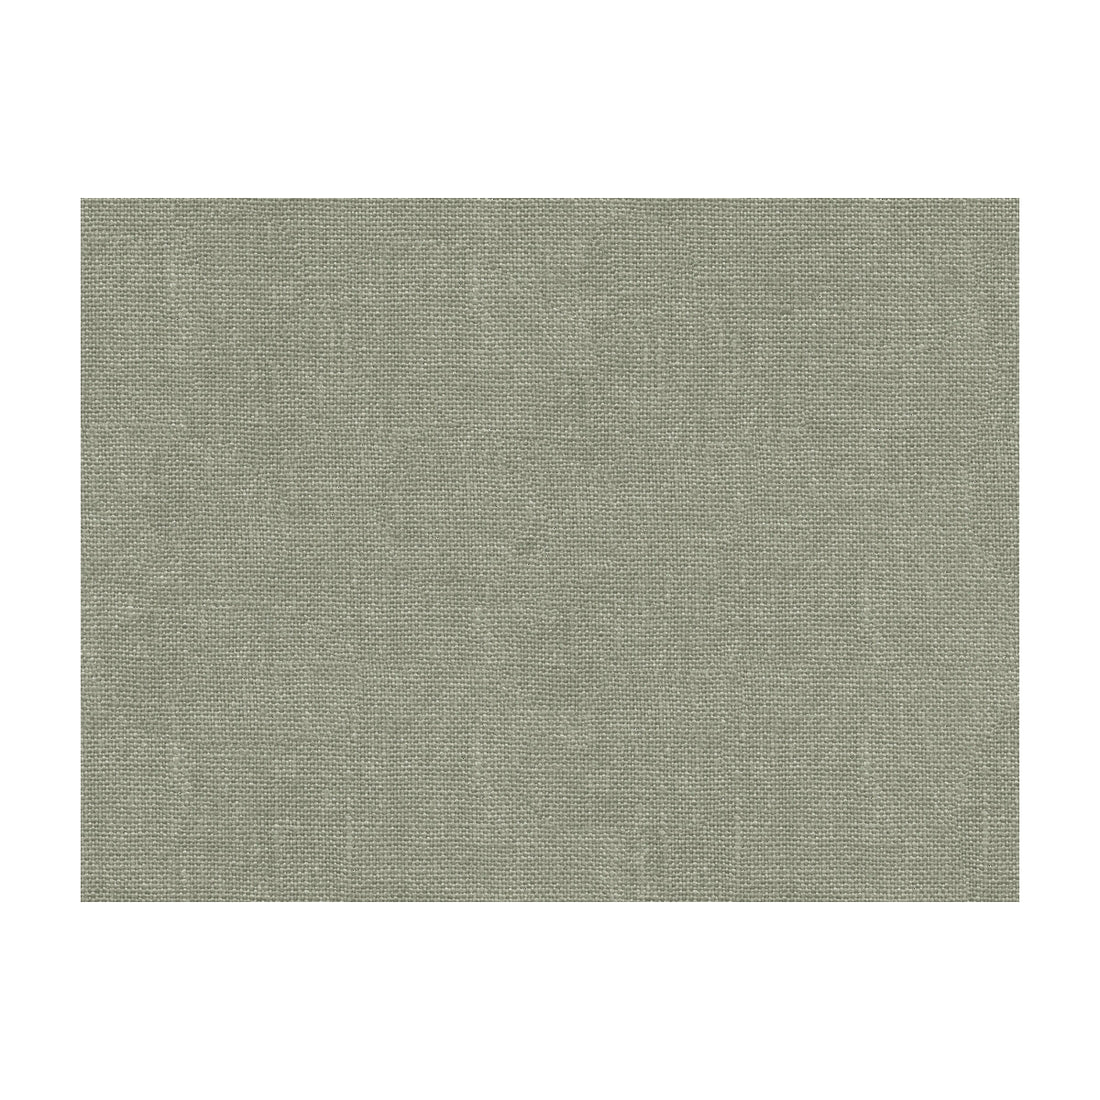 Kravet Basics fabric in 32260-11 color - pattern 32260.11.0 - by Kravet Basics in the Perfect Plains collection